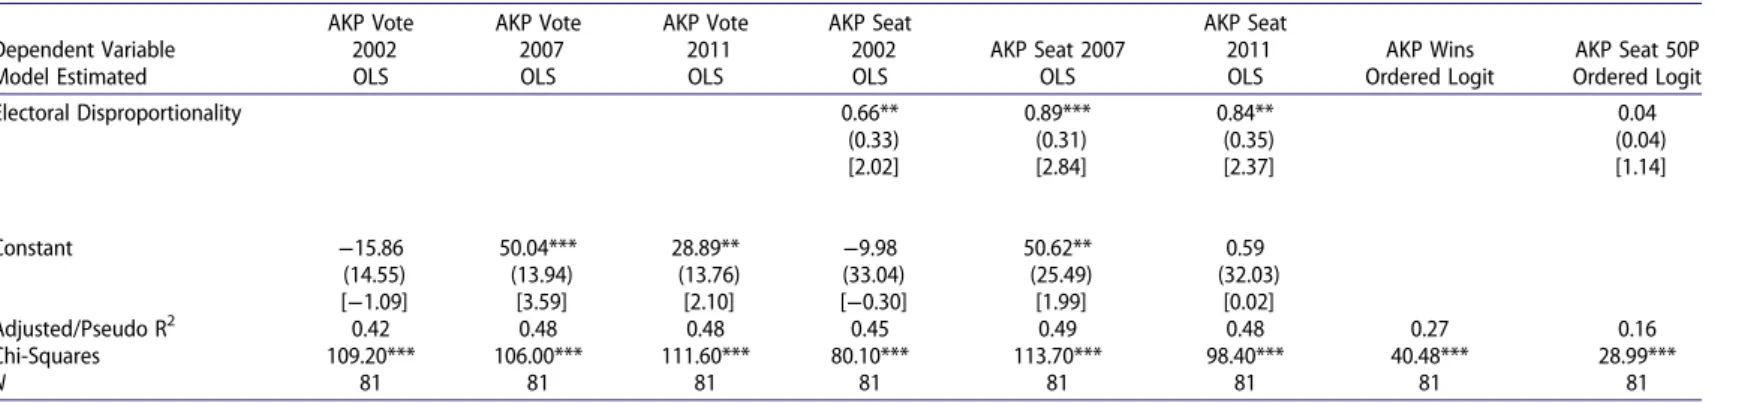 Table 2. Continued. Dependent Variable AKP Vote2002 AKP Vote2007 AKP Vote2011 AKP Seat2002 AKP Seat 2007 AKP Seat